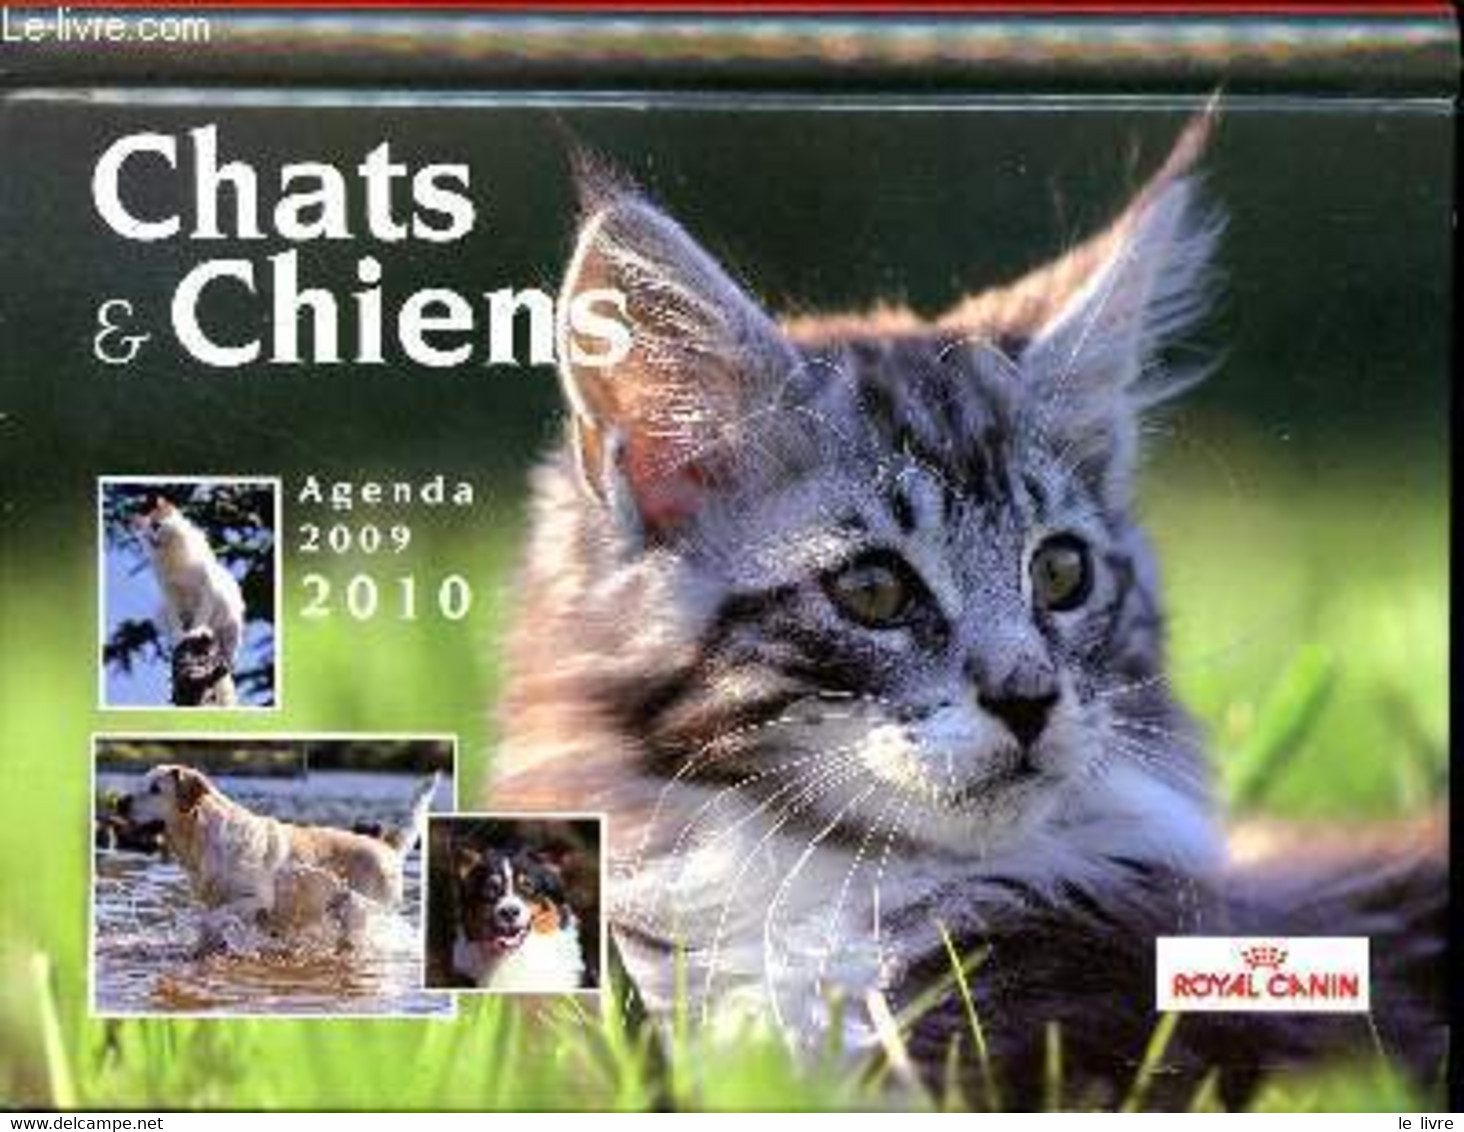 Chats Et Chiens Agenda 2009-2010 - Collectif - 2009 - Blank Diaries